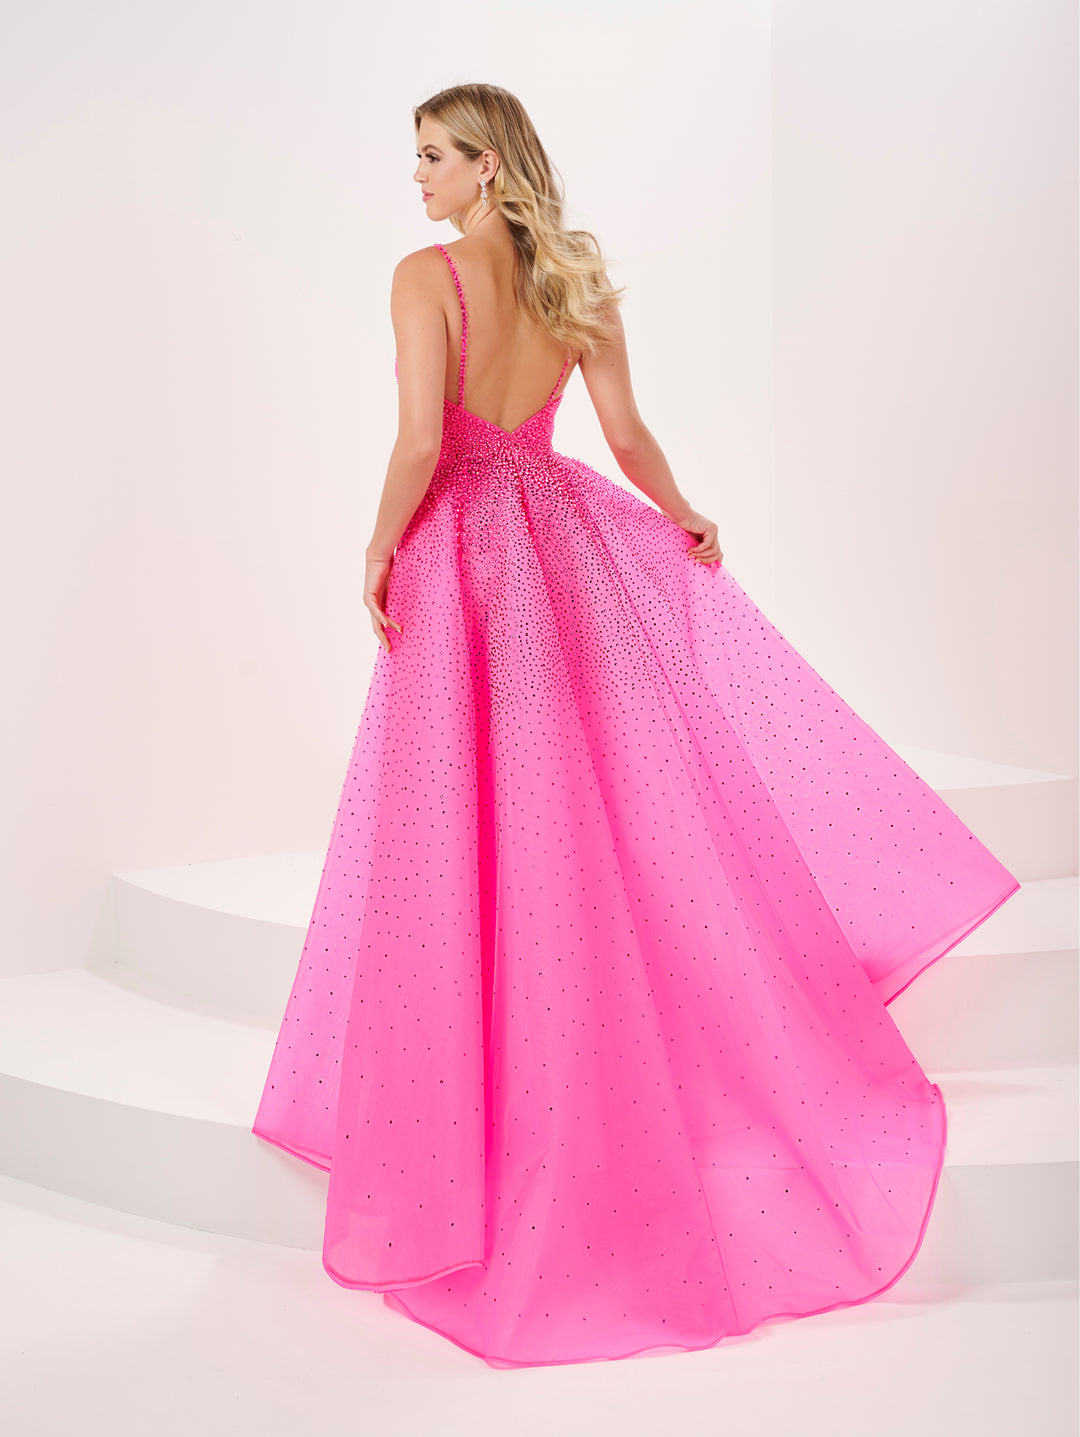 Beaded Organza Sleeveless Overskirt Gown by Panoply 14201